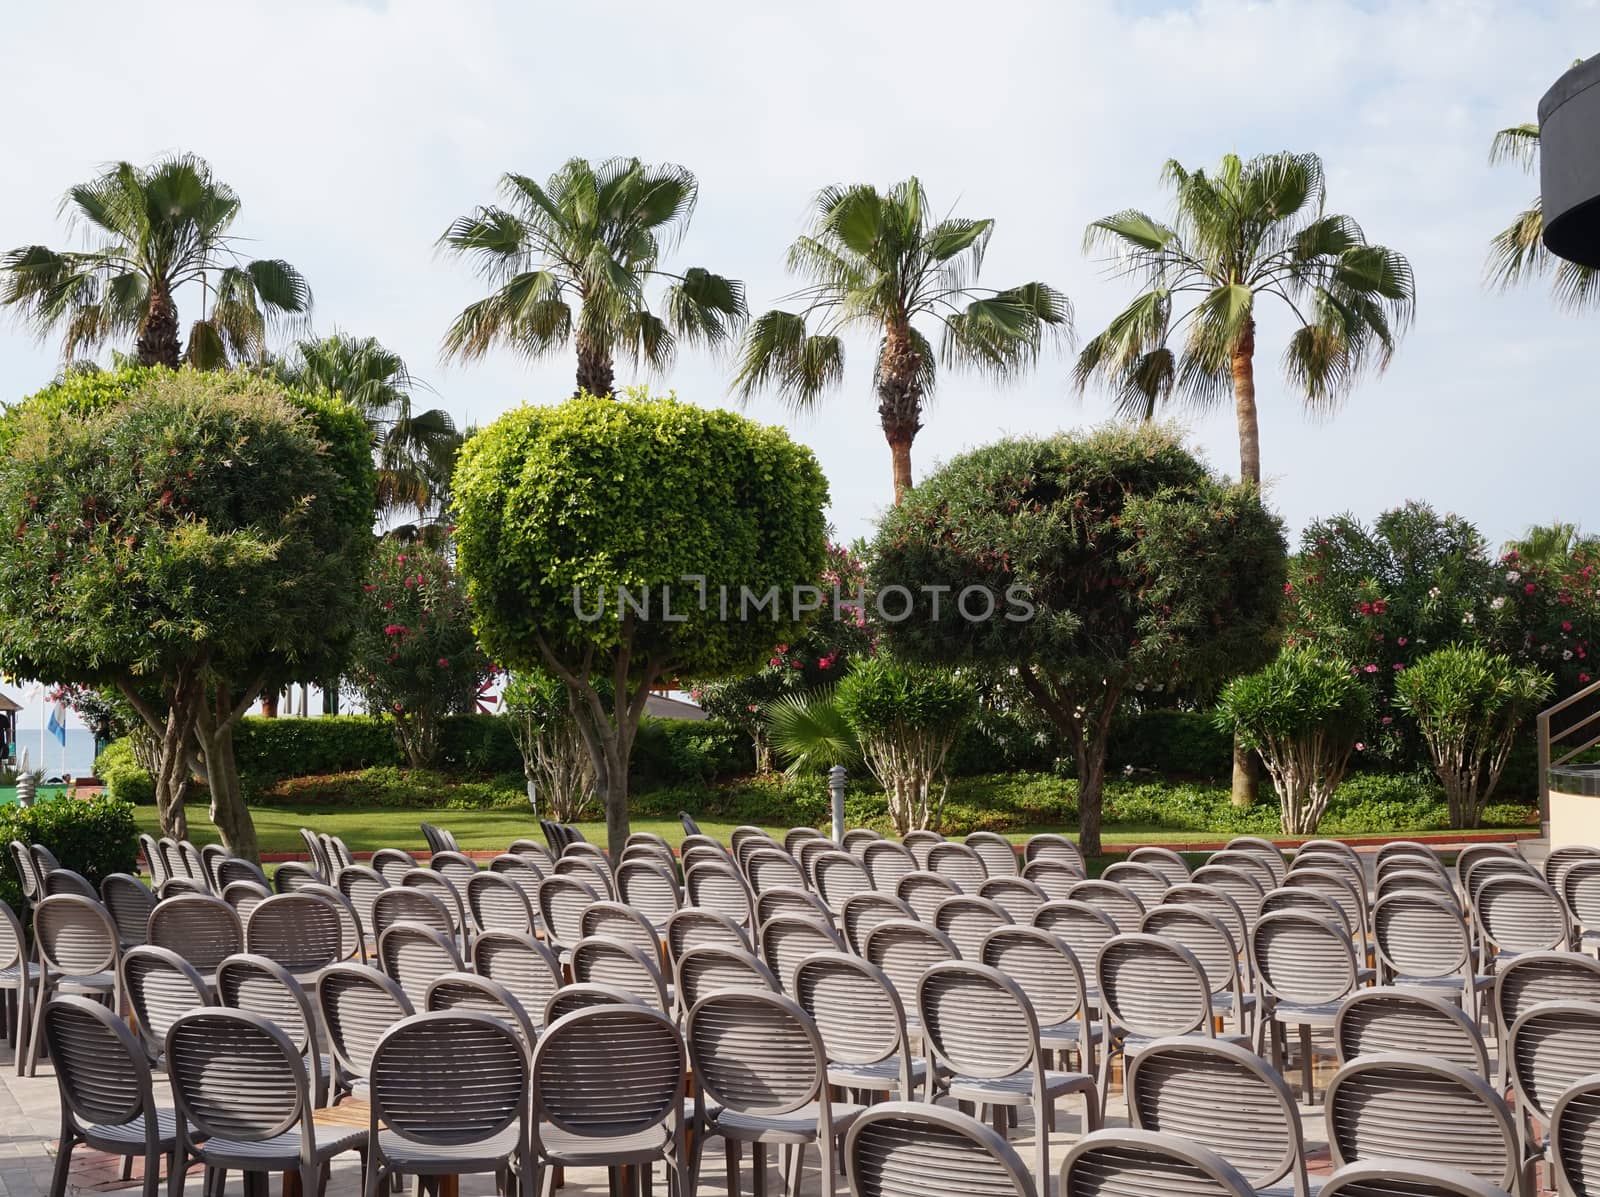 Brown chairs stand in a row in the lap of nature, the concept of a festive ceremony.